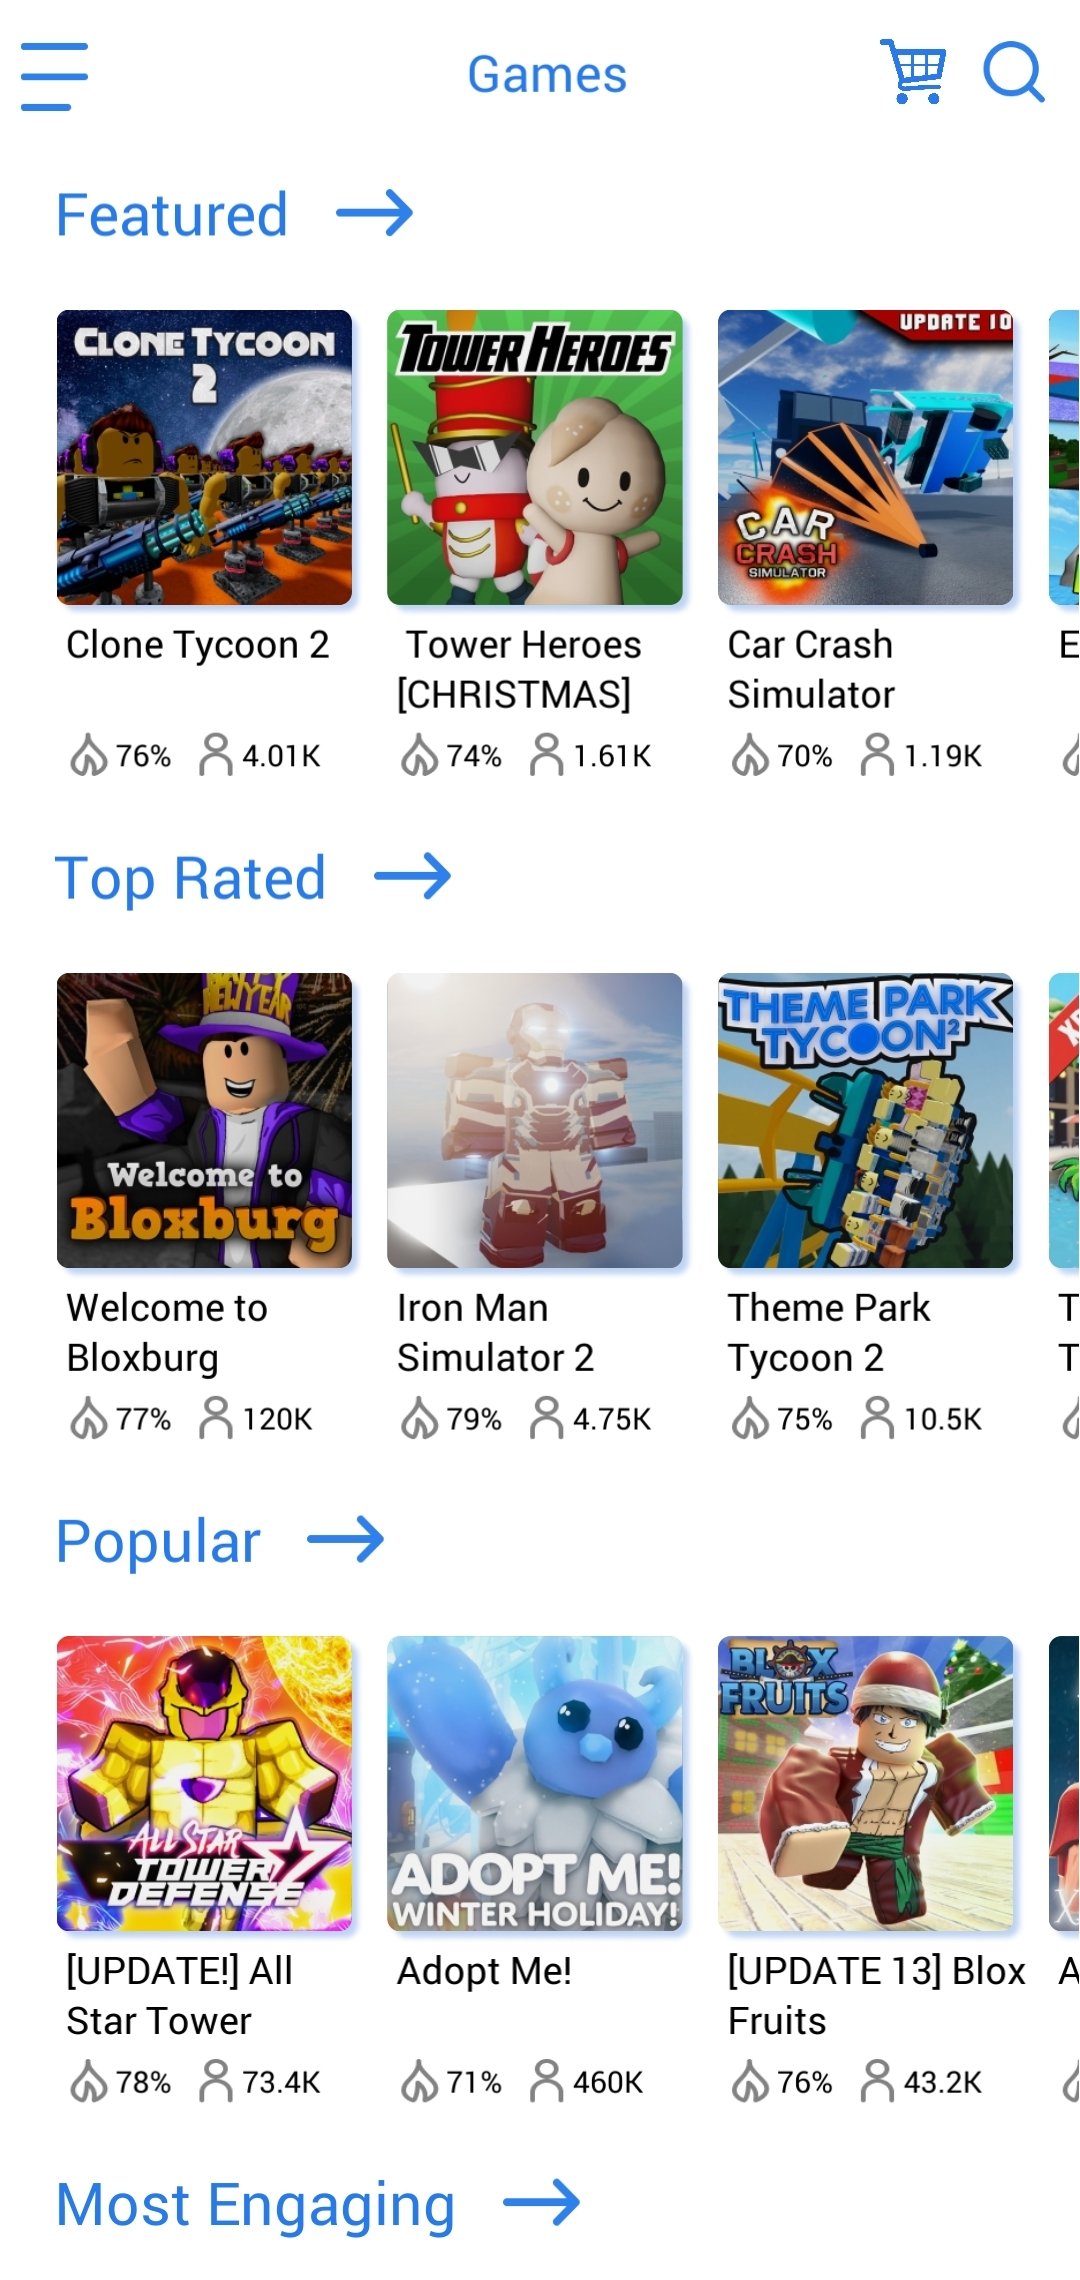 Mod-Master For Roblox na App Store